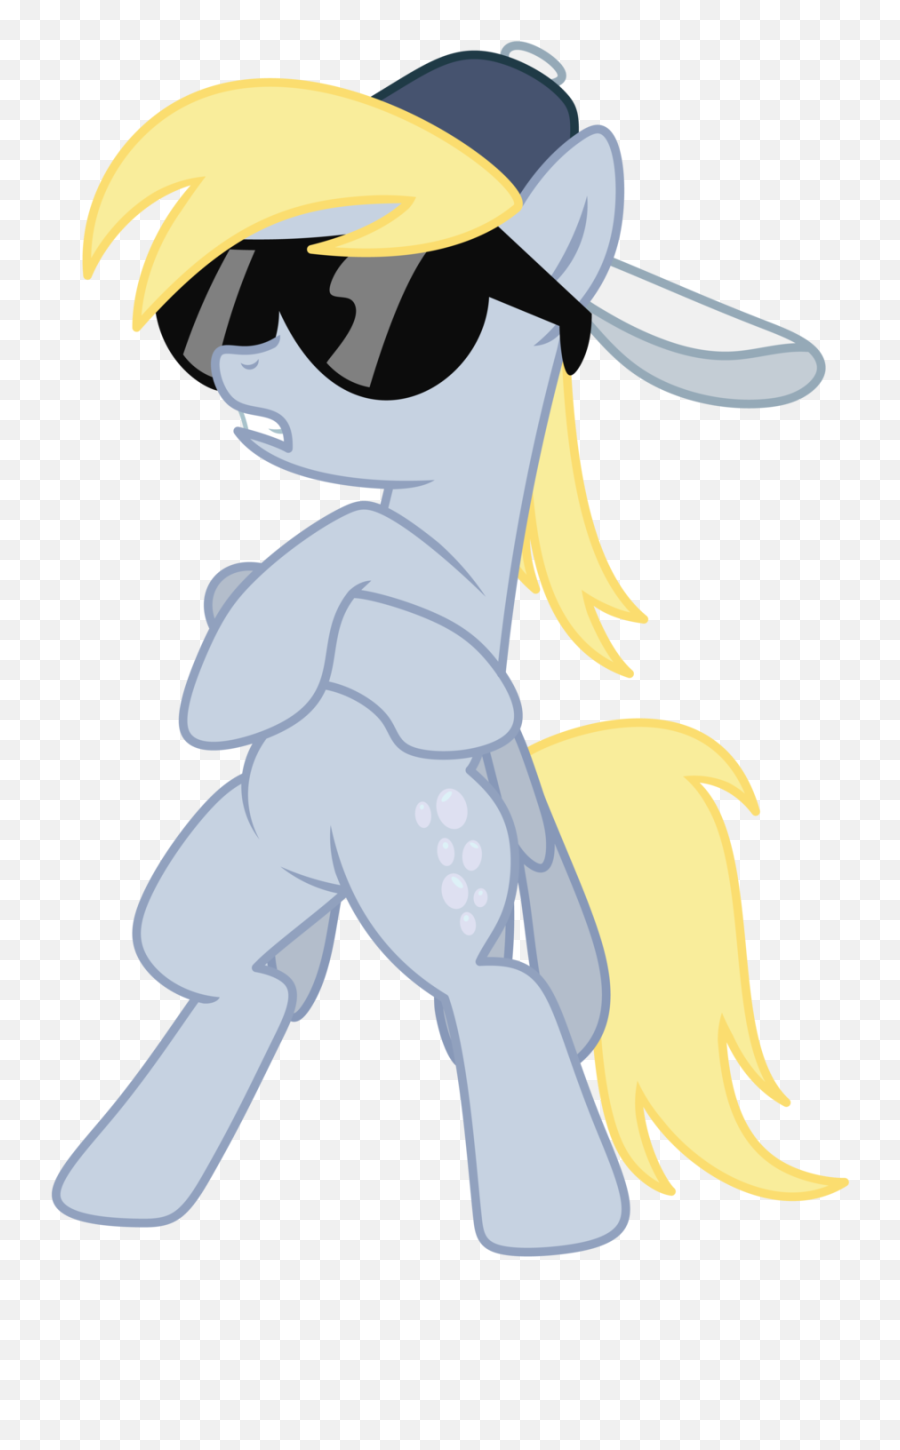 Download Hd Derpy S Got Swag By Axemgr - D4ollqp My Little Derpy With Sunglasses Png,Swag Glasses Transparent